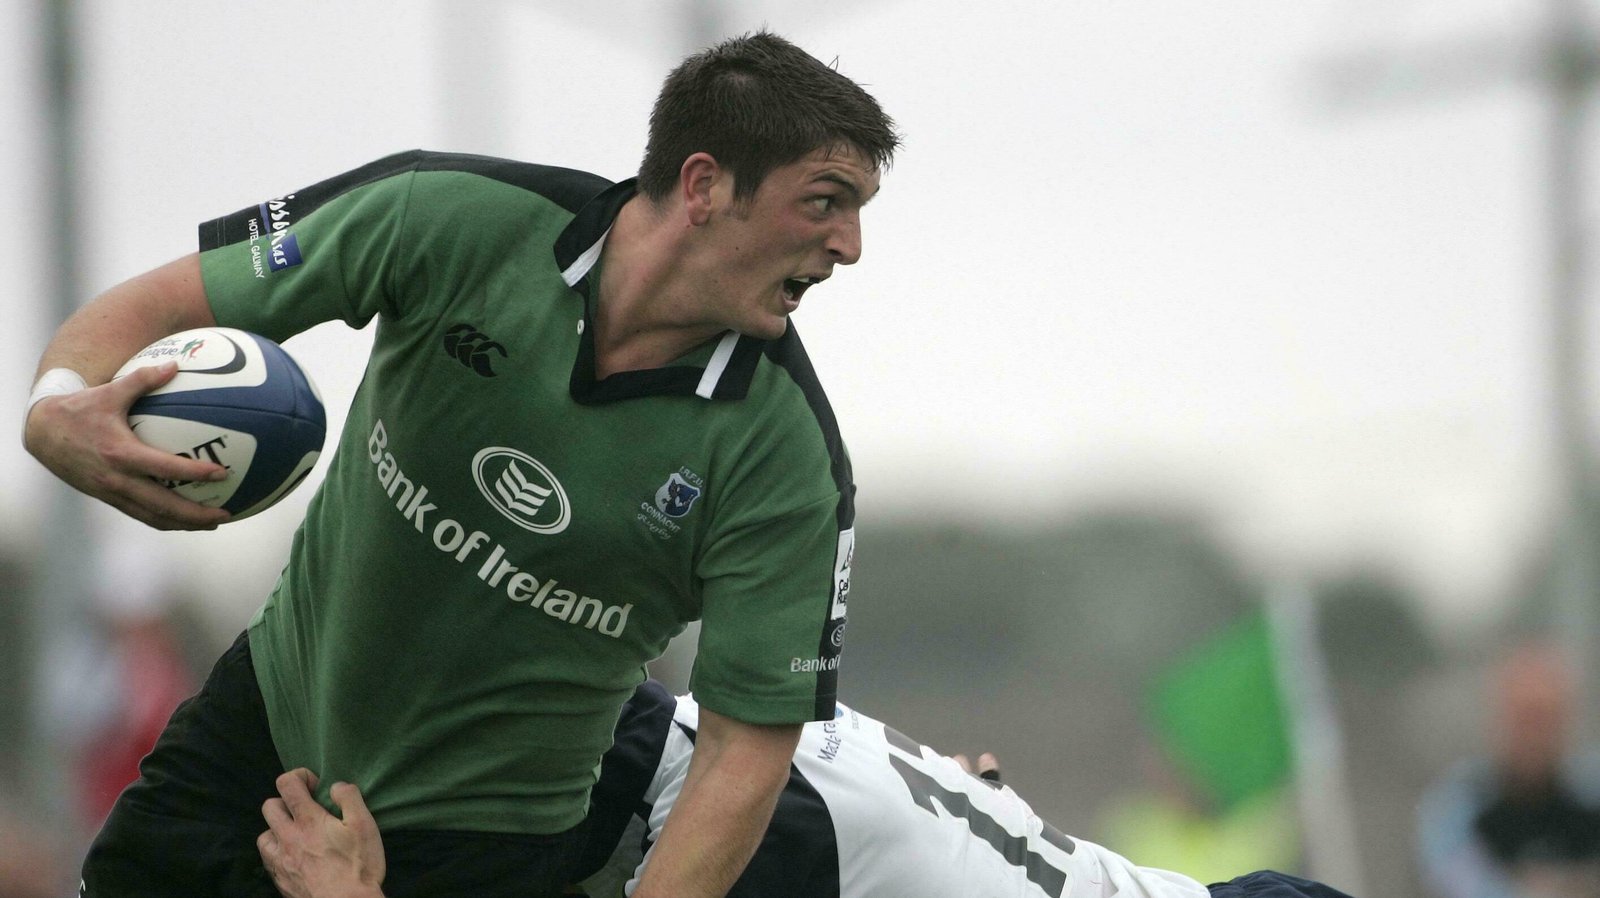 Image - The Dubliner enjoyed a fine first season at the Sportsground